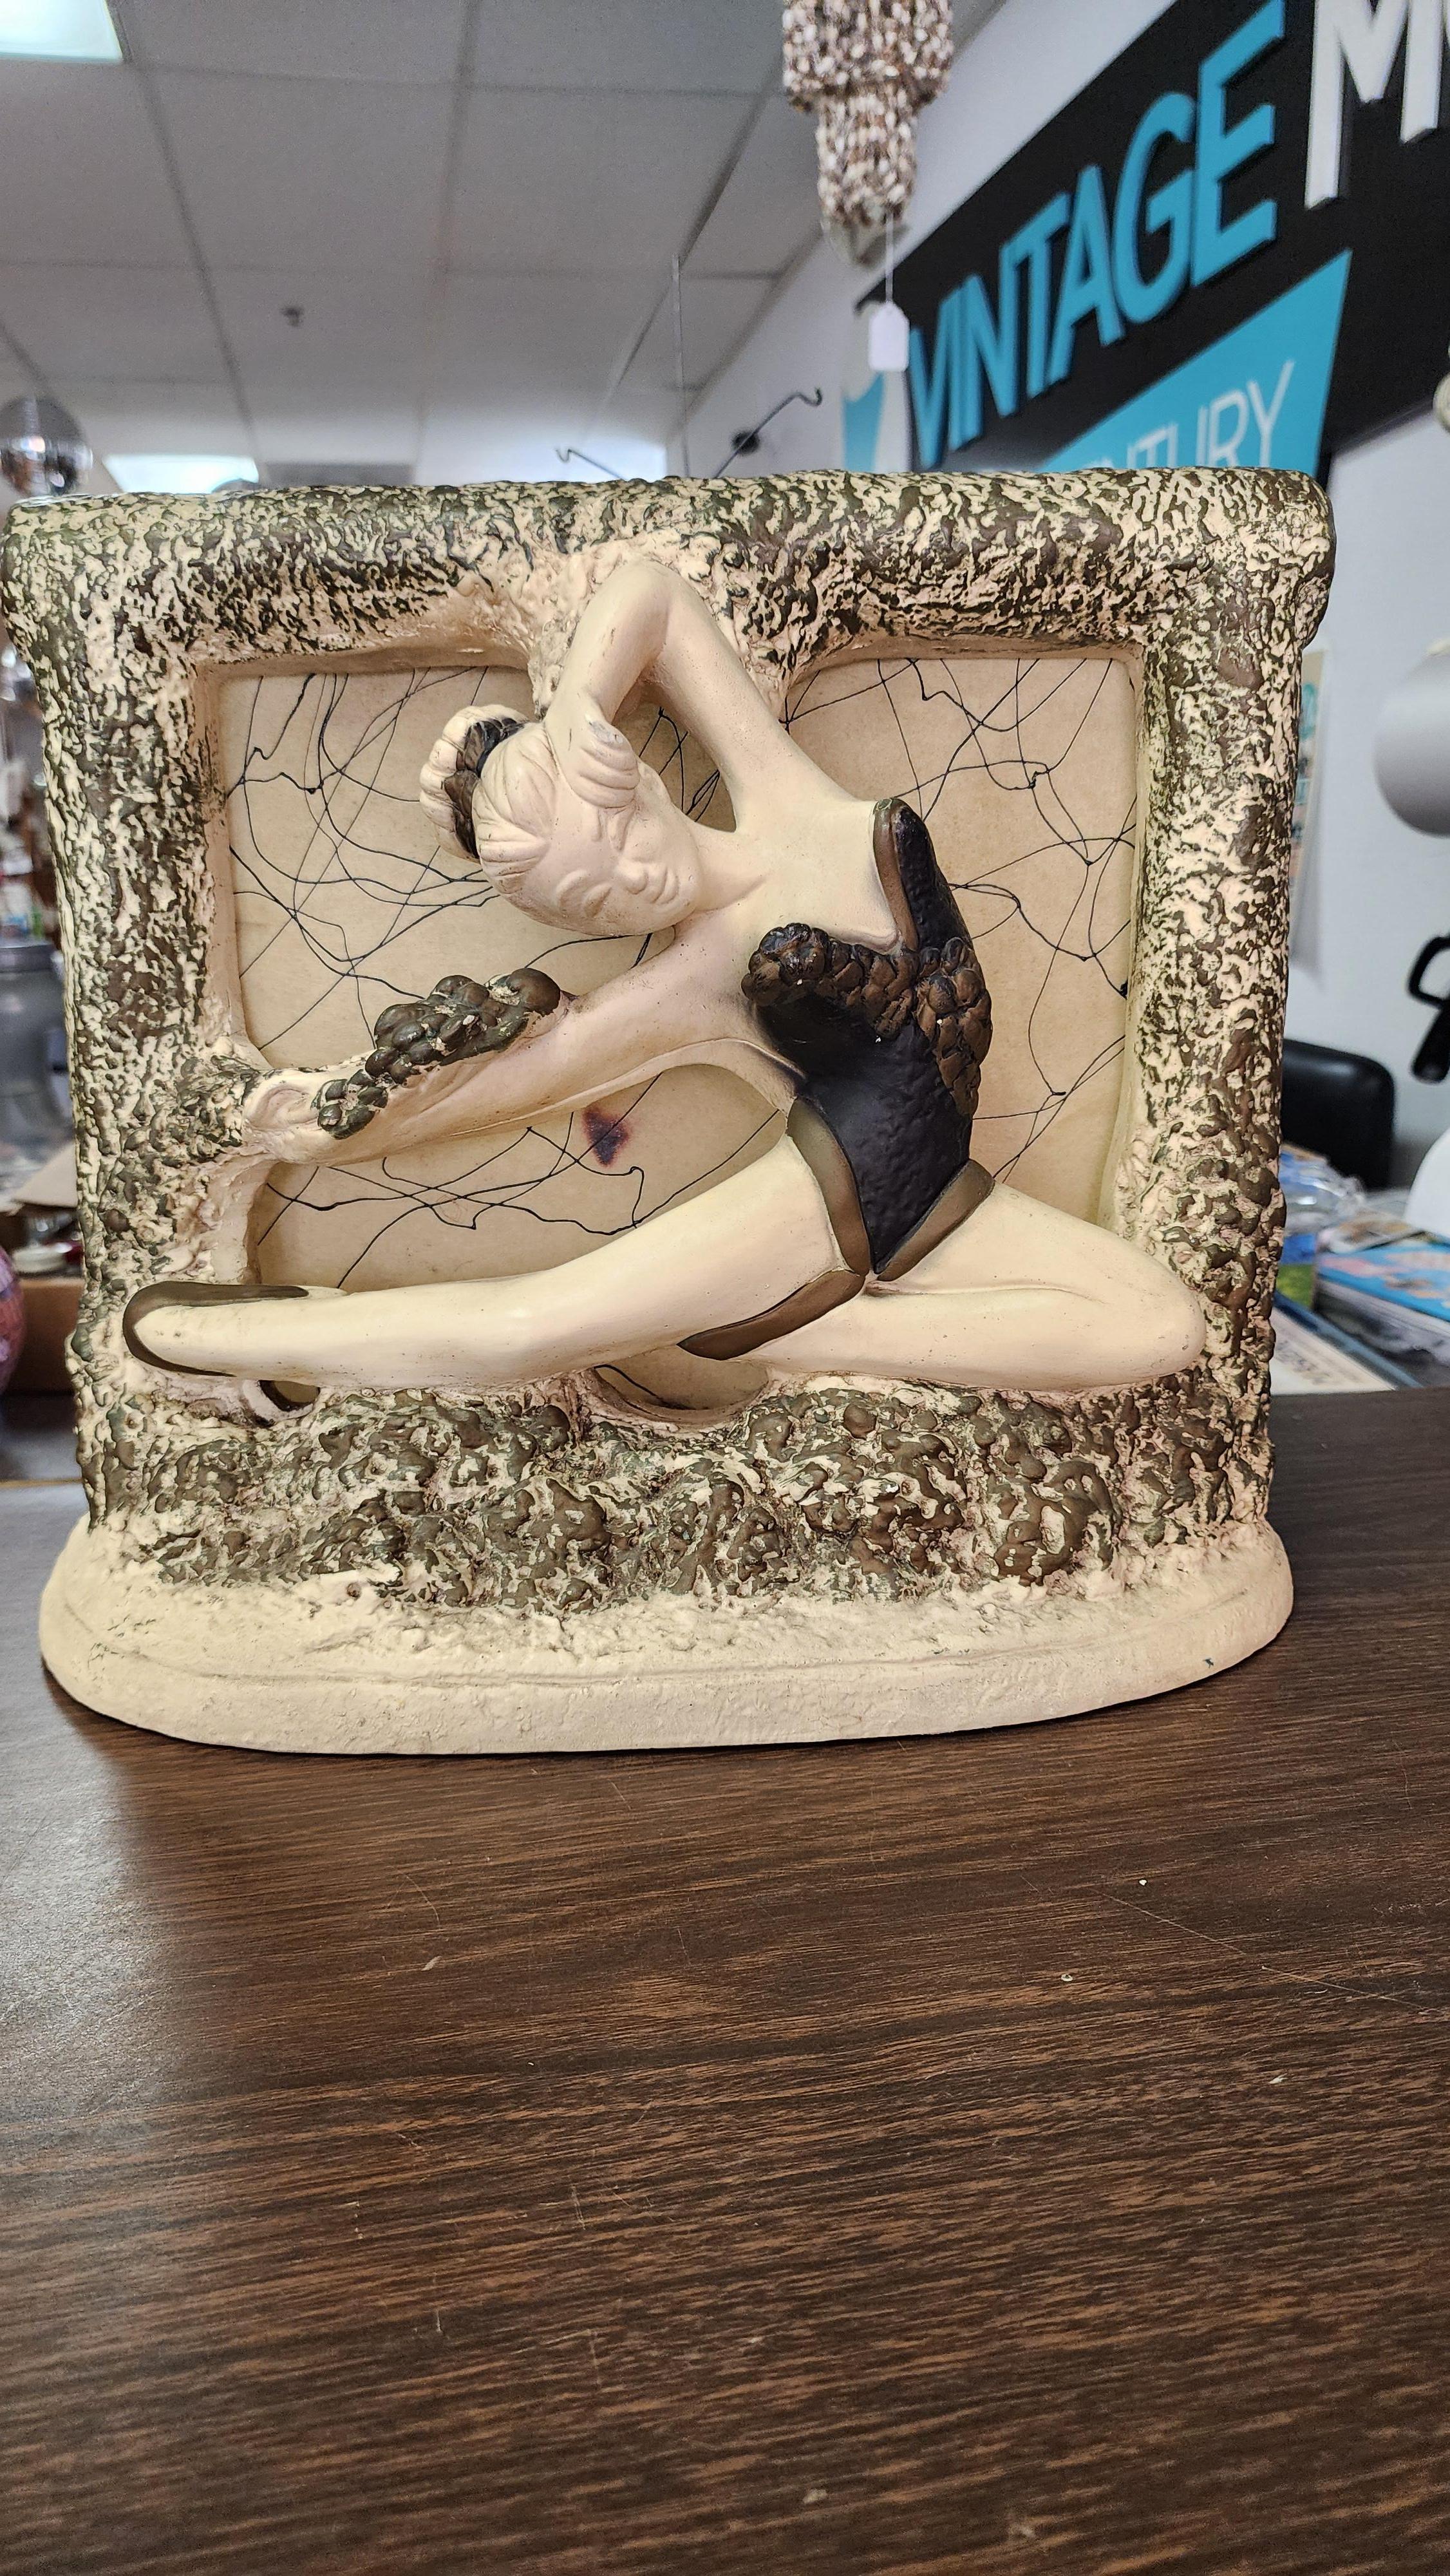 This incredible lamp from the 1950s is by N.Y.S. It depicts a ballet dancer with black tutu and bun in her hair in full leap. The light comes from the back and glows through the decorated vellum. The frame around the vellum is contoured chalkware